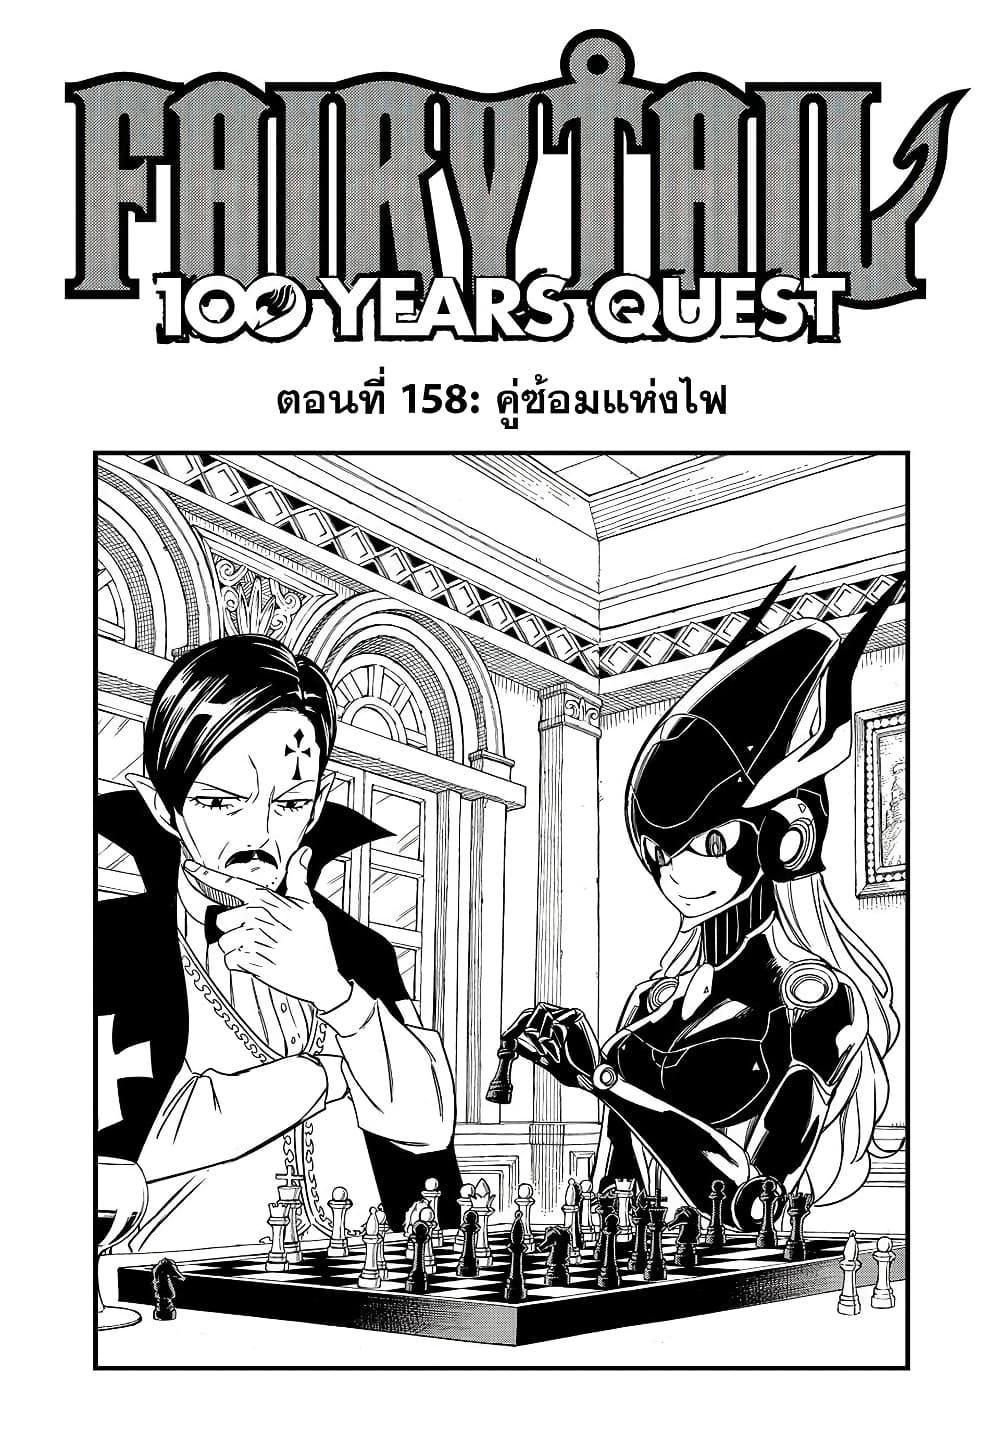 Fairy Tail 100 Years Quest ตอนที่ 158 (1)